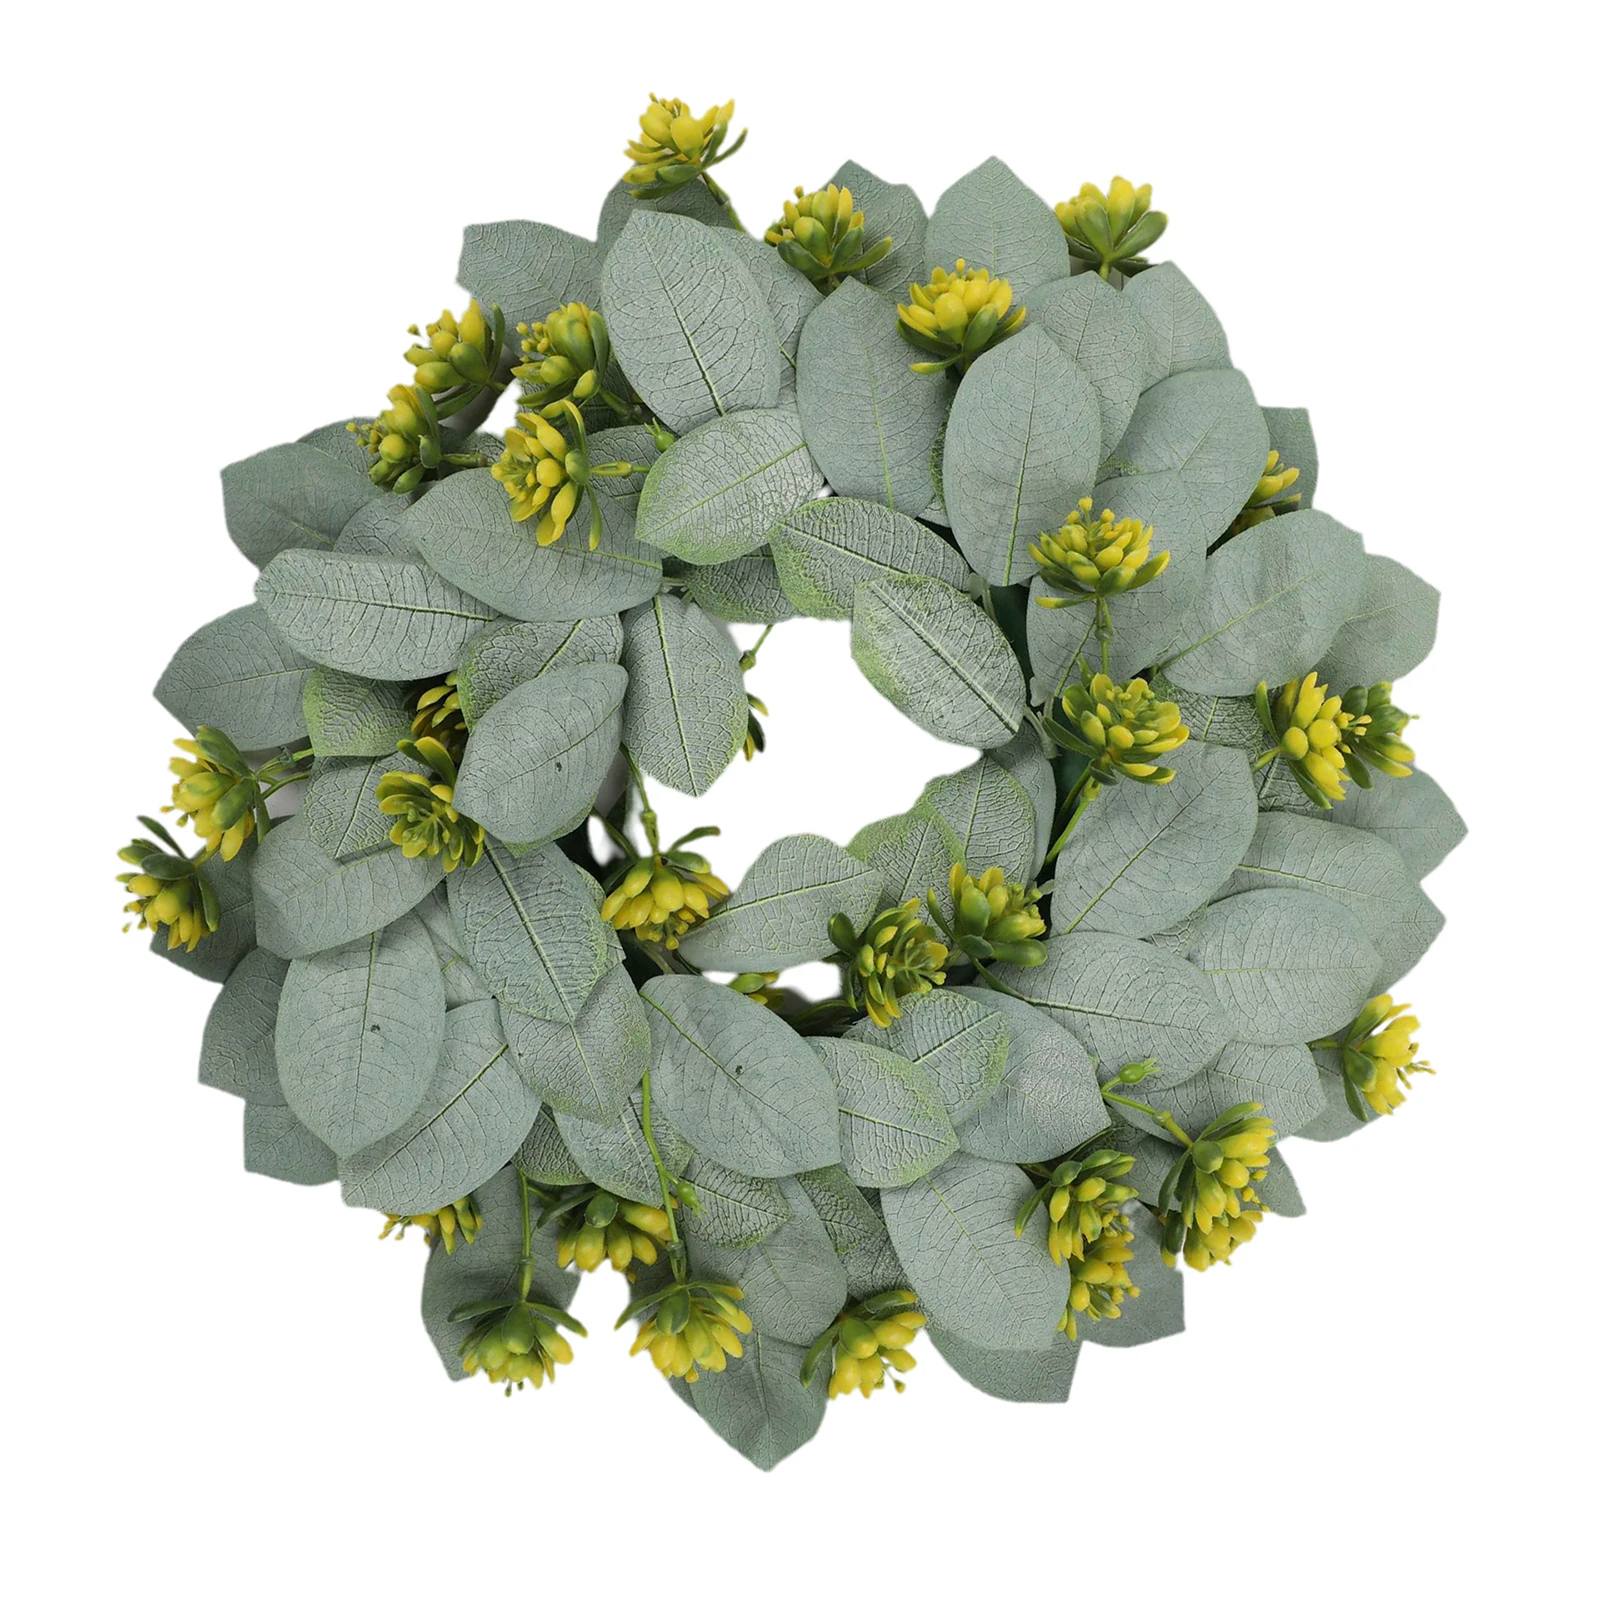 Leaves Eucalyptus Wreath Garland for Front Door ing Wedding Holiday Festival Celebration Decor Ornaments